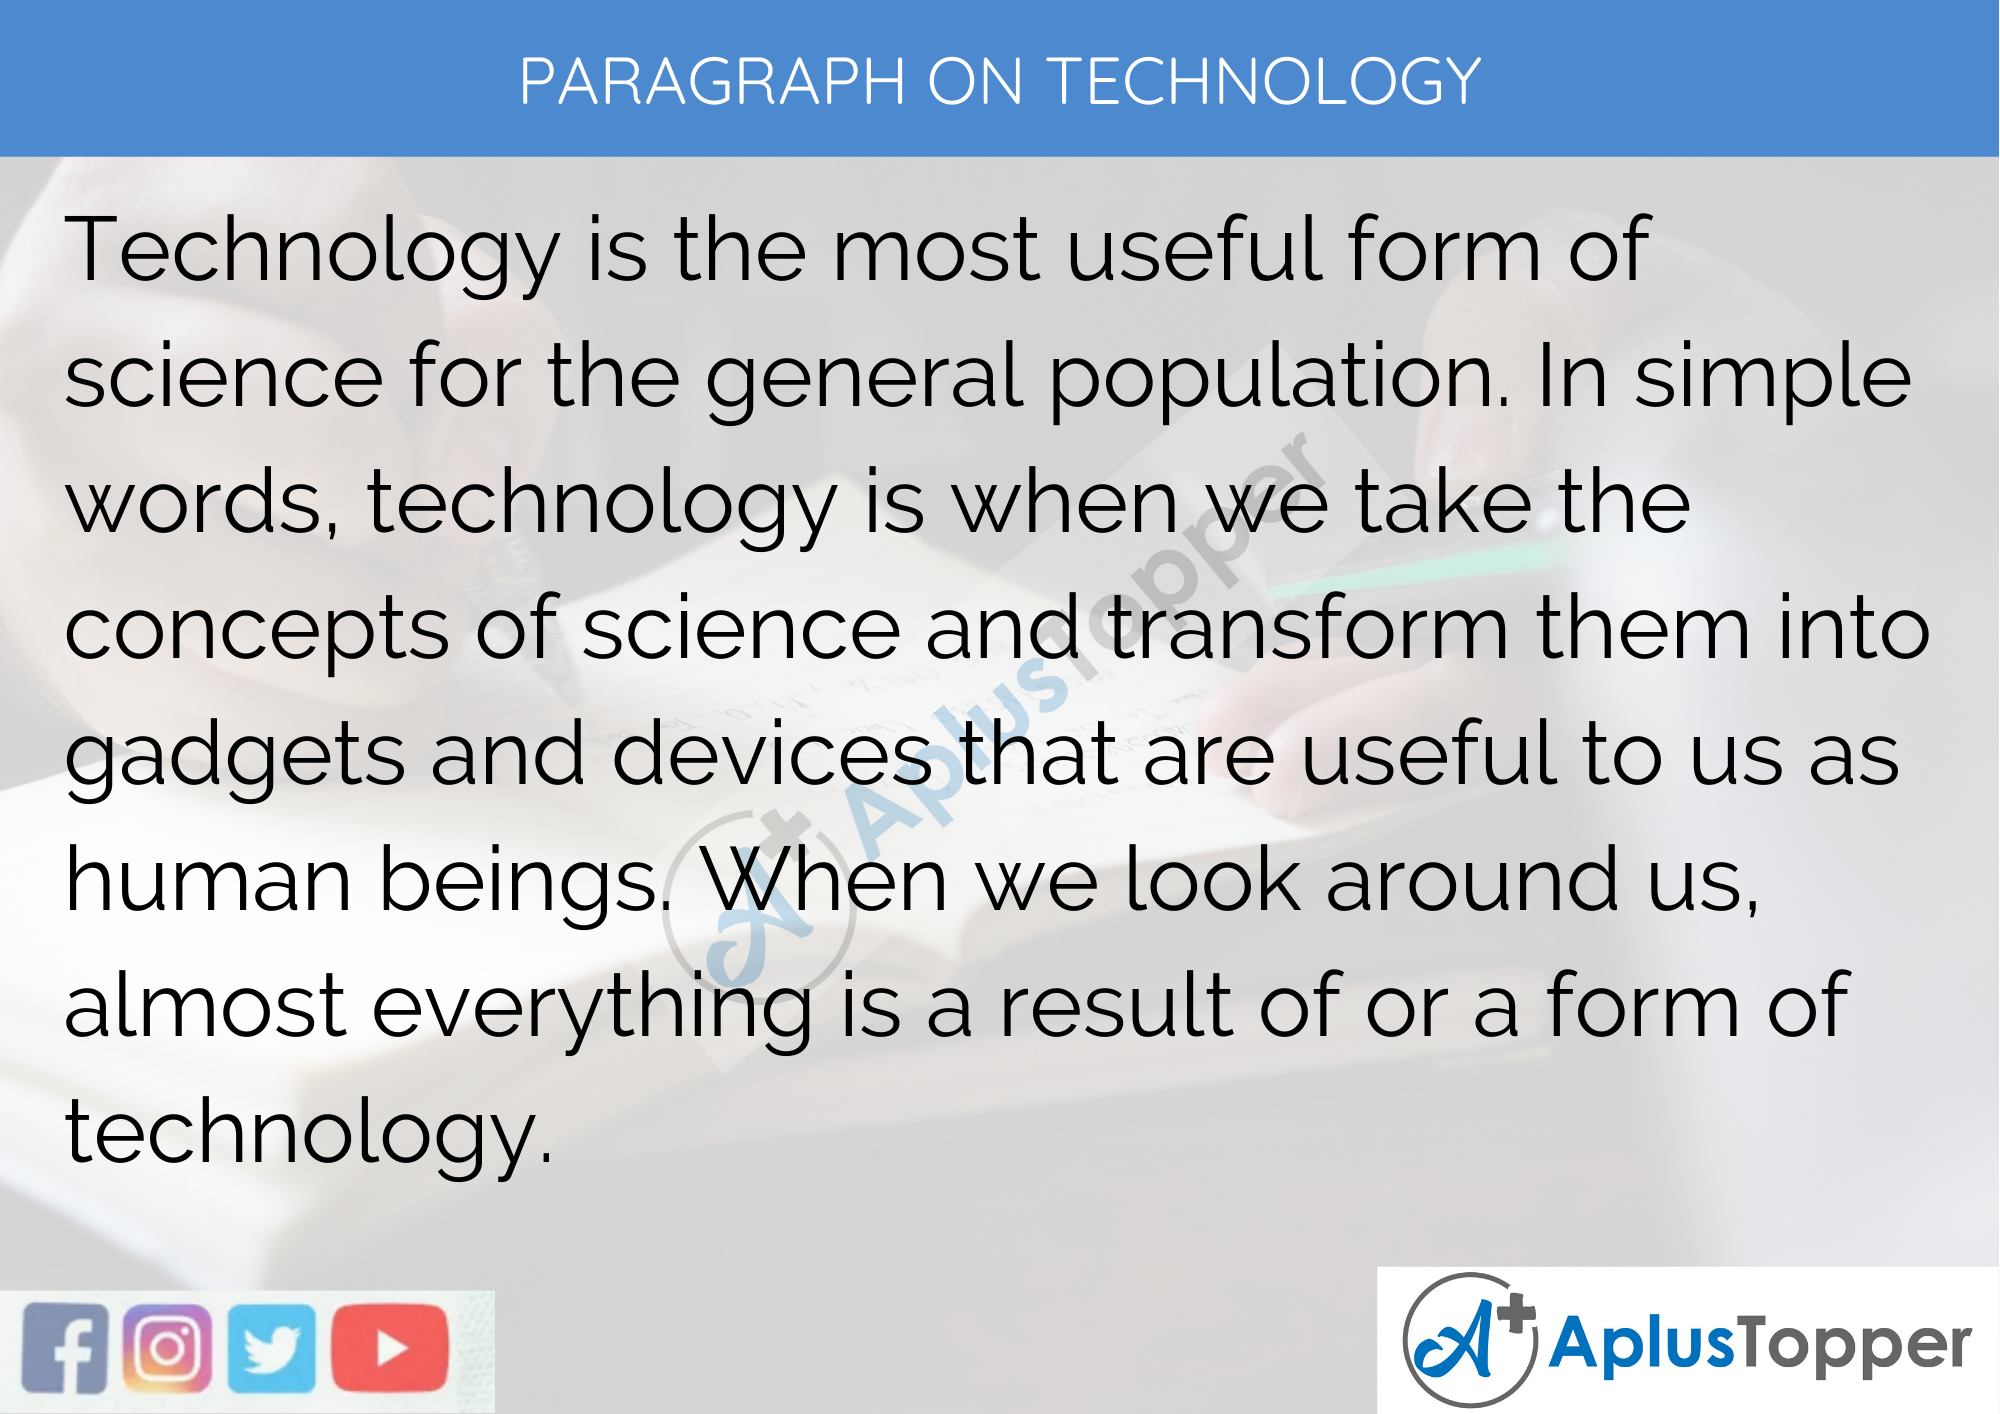 Paragraph on Technology - 250 to 300 Words for 9, 10, 11, 12, and Competitive Exam Students